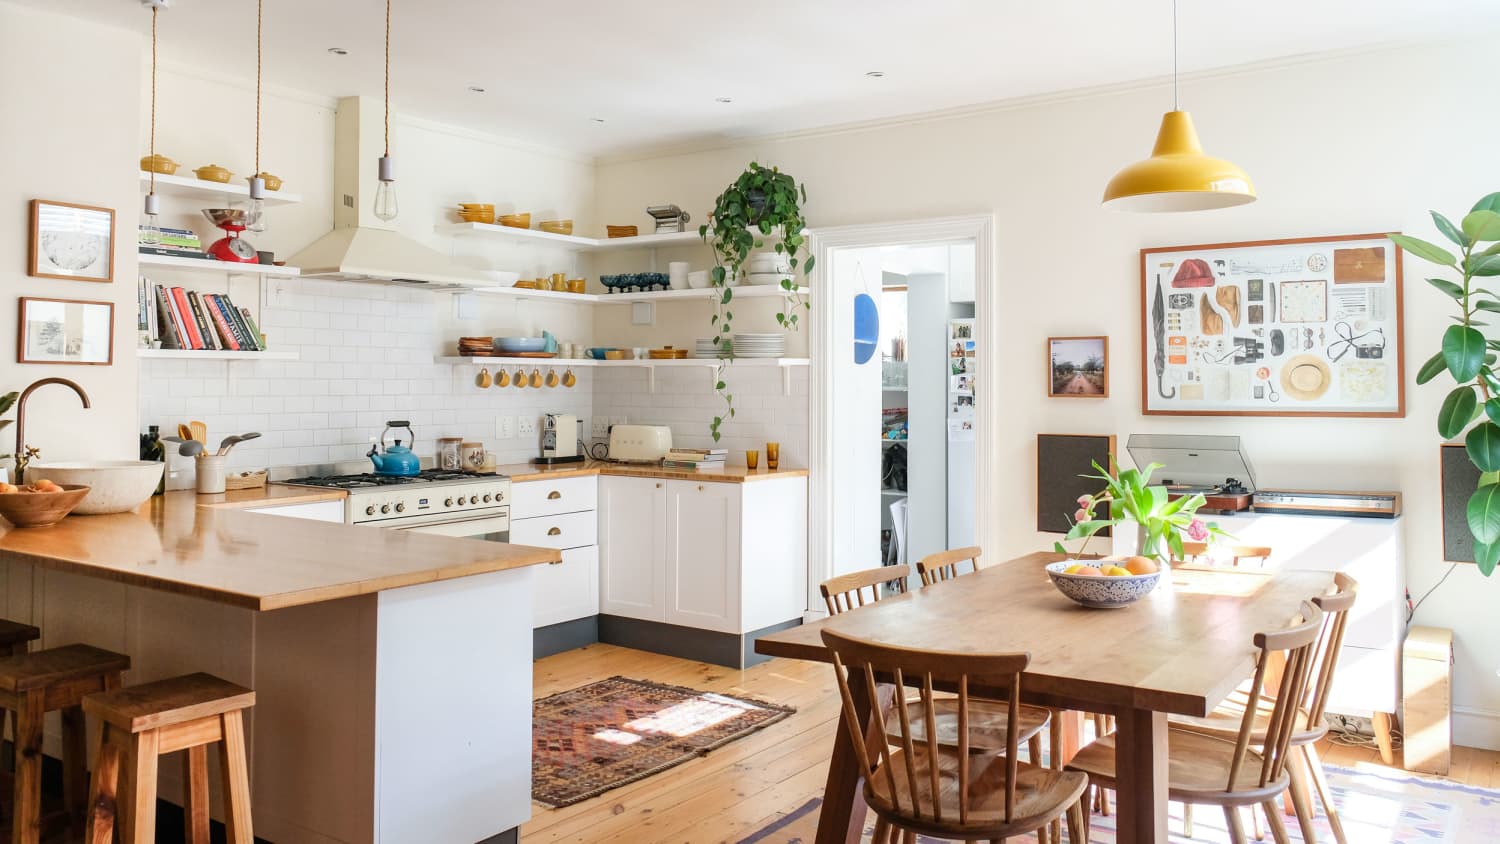 How To Clean A Kitchen: The Ultimate Guide To Clean Like A Pro